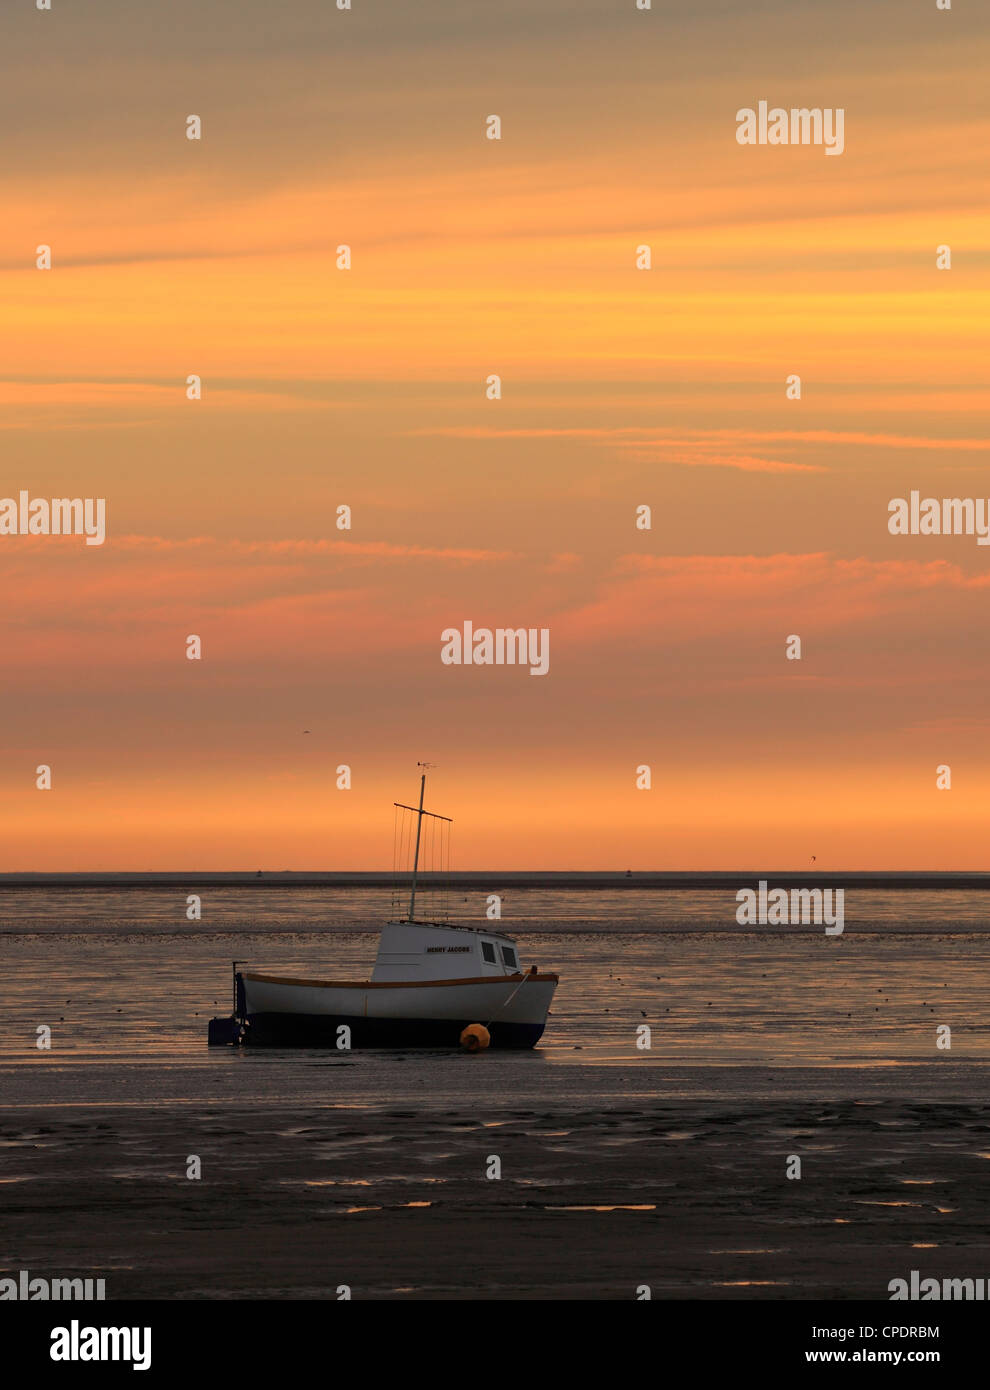 Looking across The Wash estuary at sunset from Snettisham, Norfolk. Stock Photo